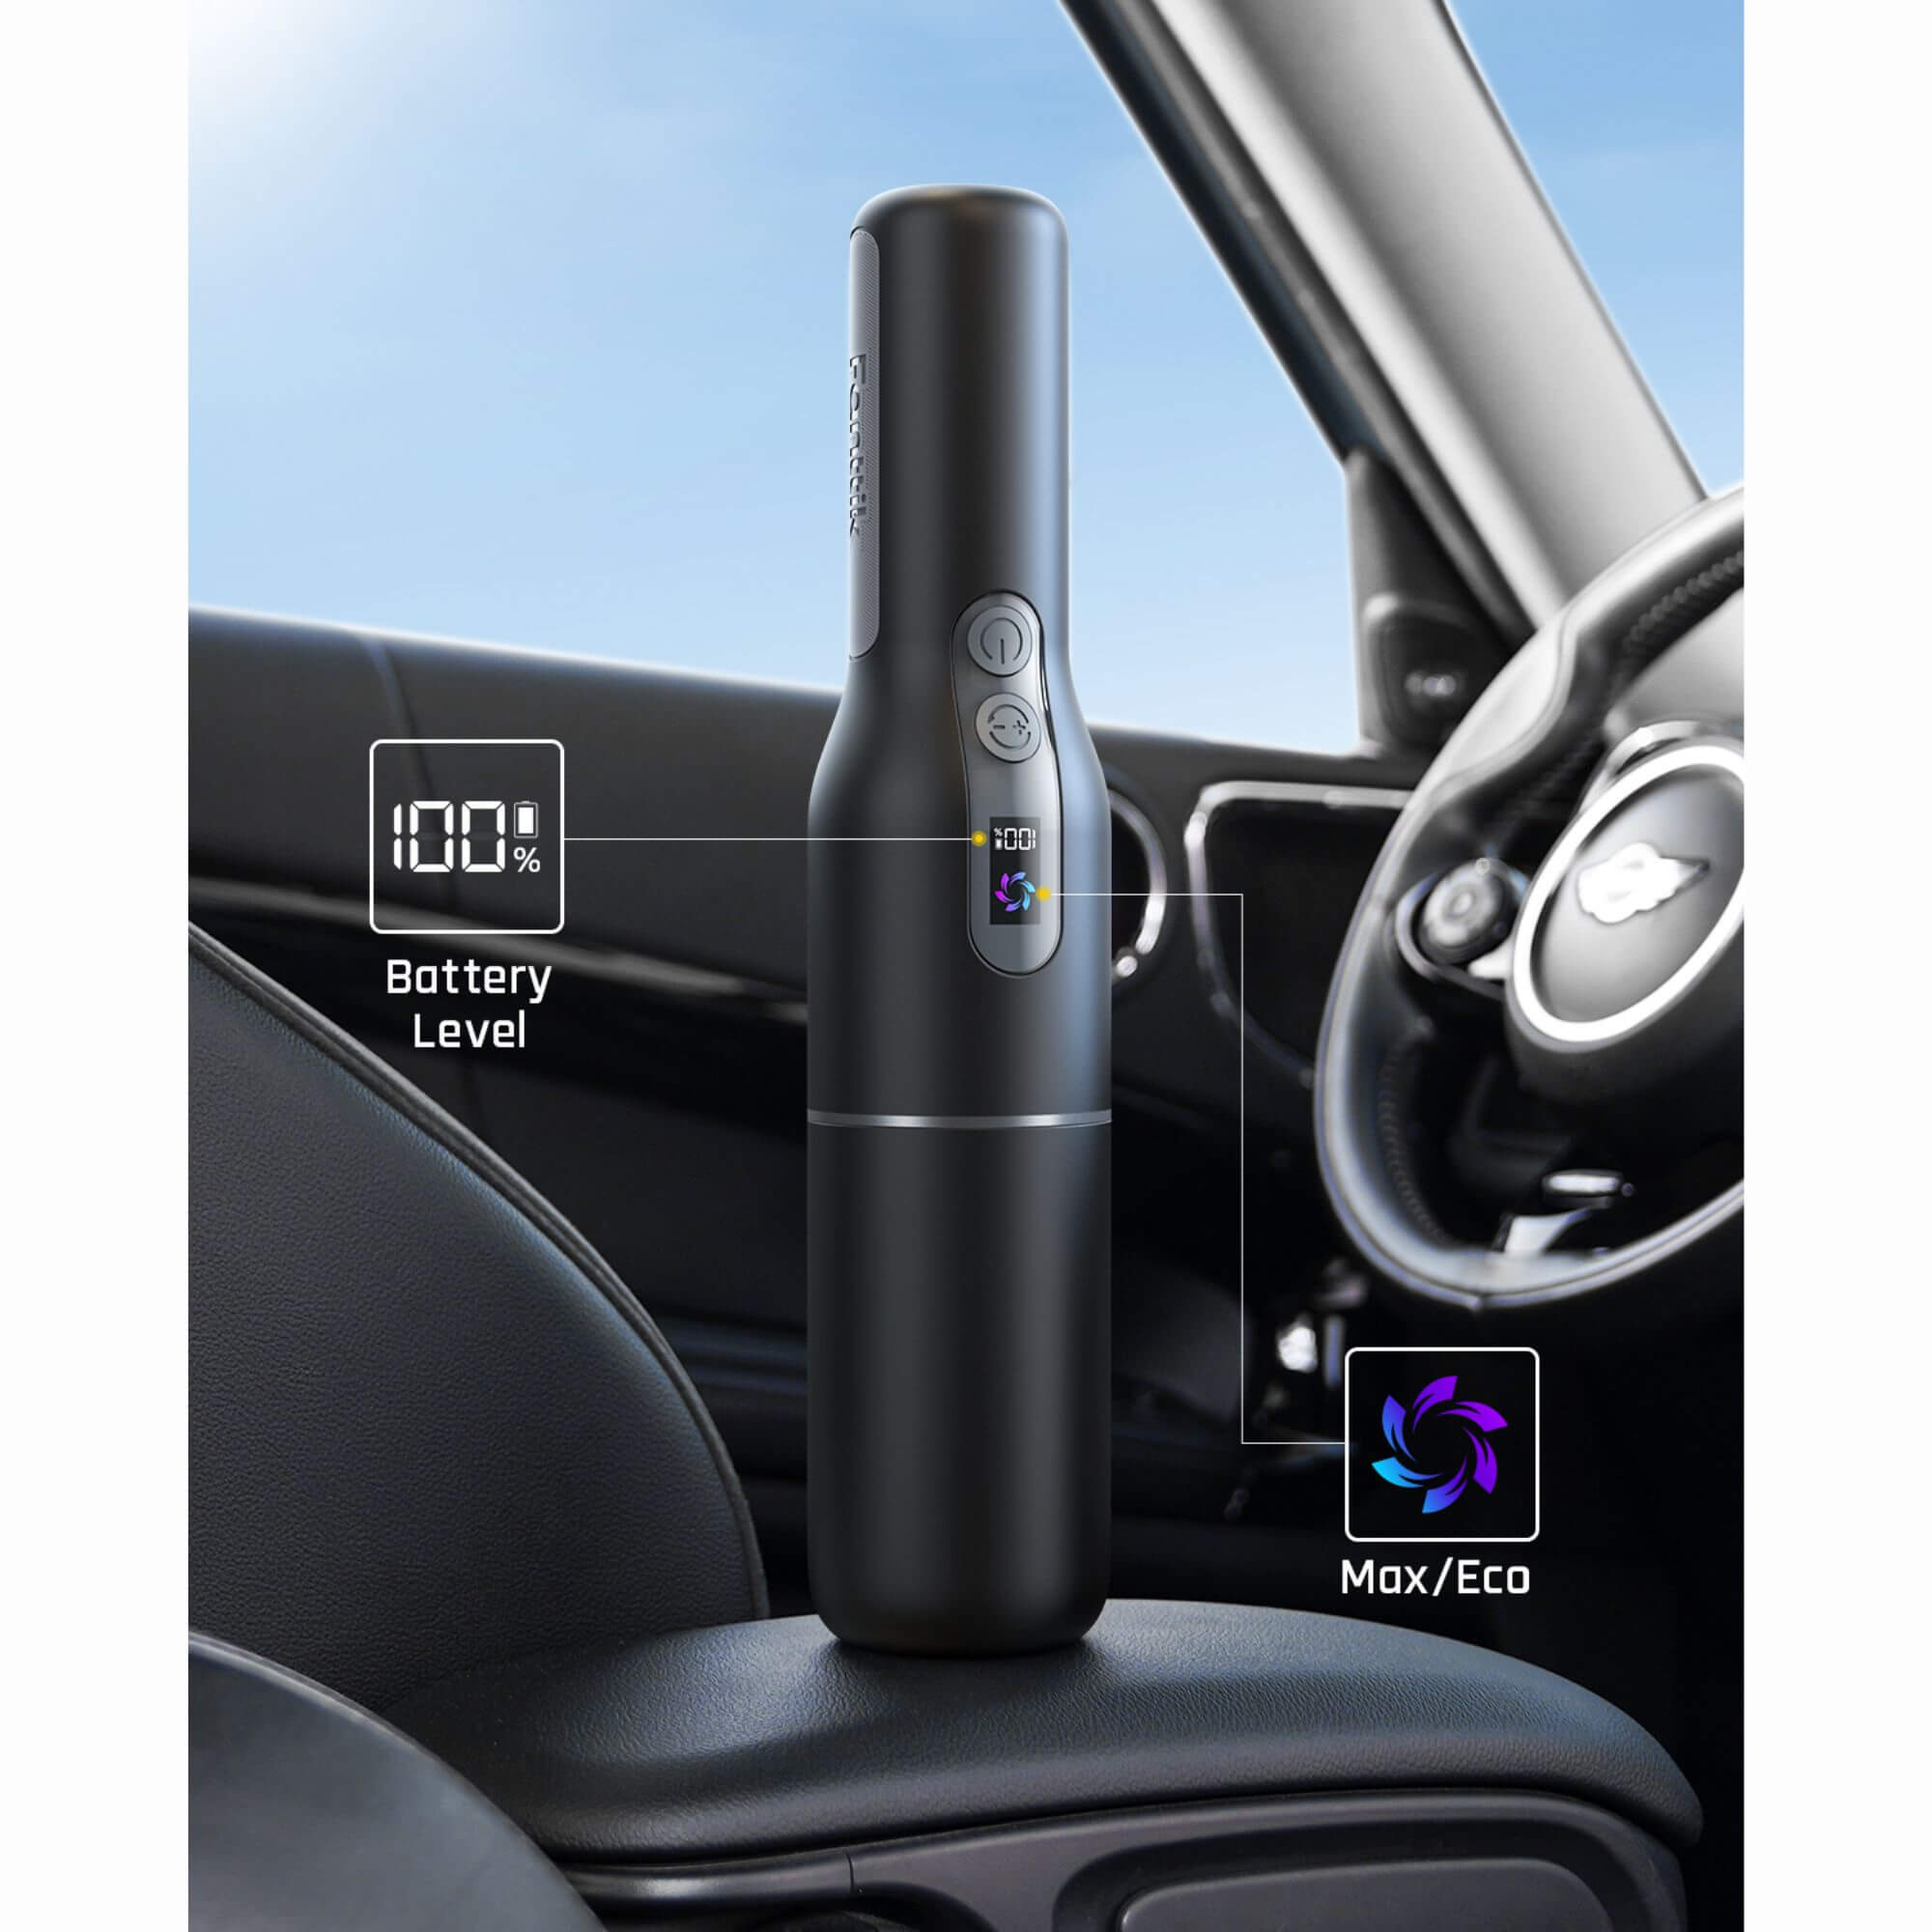 Fanttik V7 pocket cordless car vacuum with intelligent color screen display enables monitoring the state of the vacuum, gear, power, and suction - at a glance. Enjoy the convenience of the intelligent age.